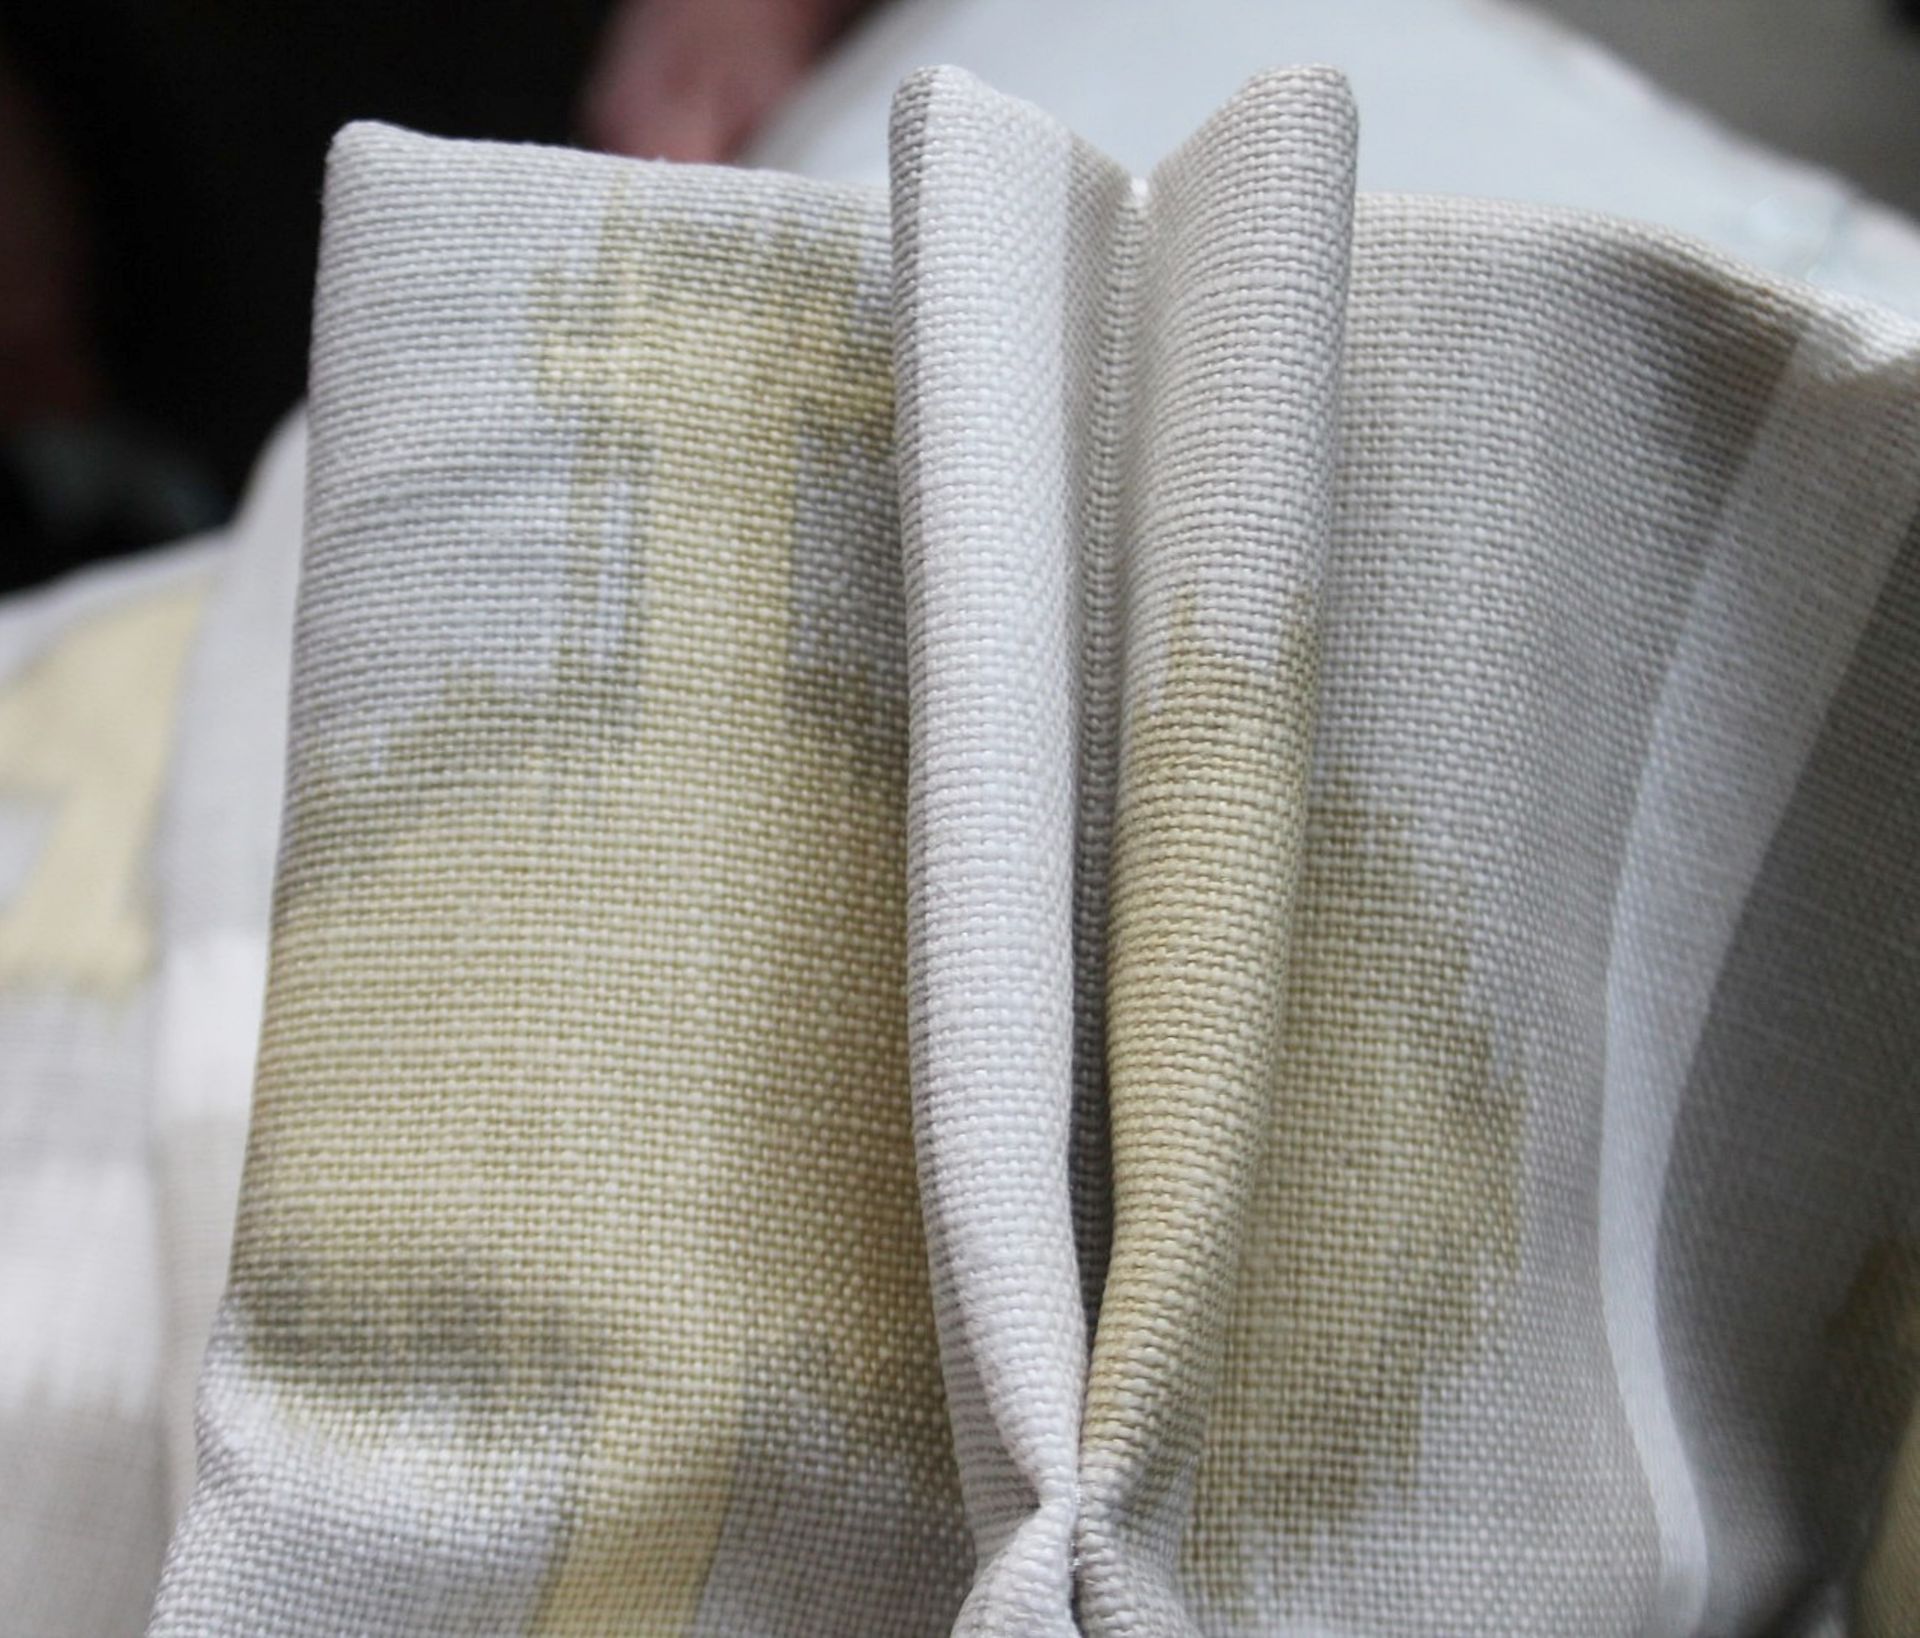 2 x Pairs Of Premium Hand-made Lined Curtains In Neutral Tone With An Abstract Design In Light Olive - Image 3 of 6